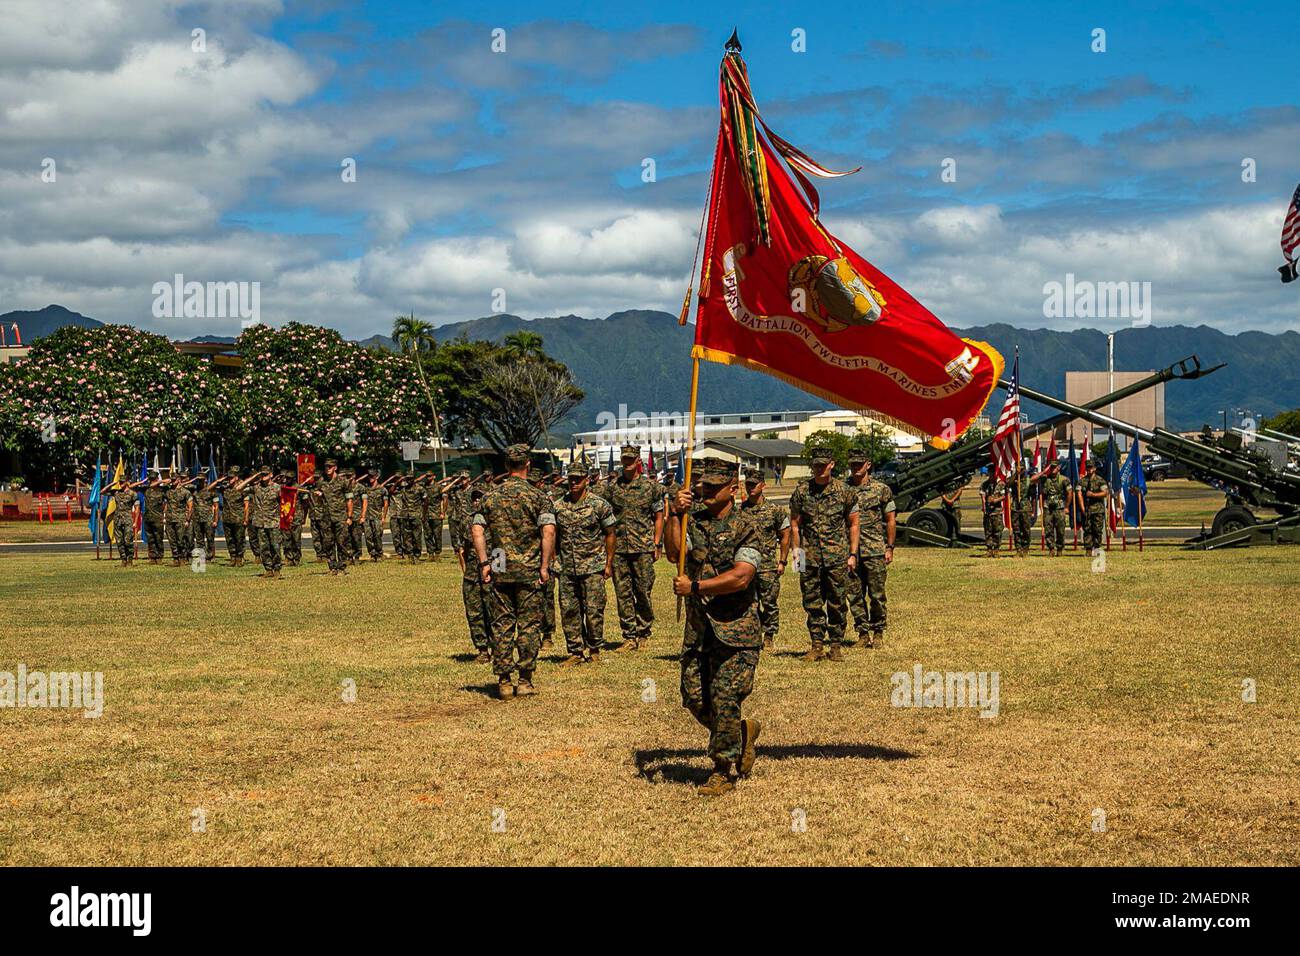 U.S. Marine Corps Sgt. Maj. Jose Romero, sergeant major, 1st Battalion, 12th Marine Regiment, delivers the colors during the unit’s change of command ceremony on Marine Corps Base Hawaii, May 26, 2022. LtCol. Richard Neikirk relinquished command of 1st Battalion, 12th Marines to Lt. Col. Joseph Gill II. Stock Photo